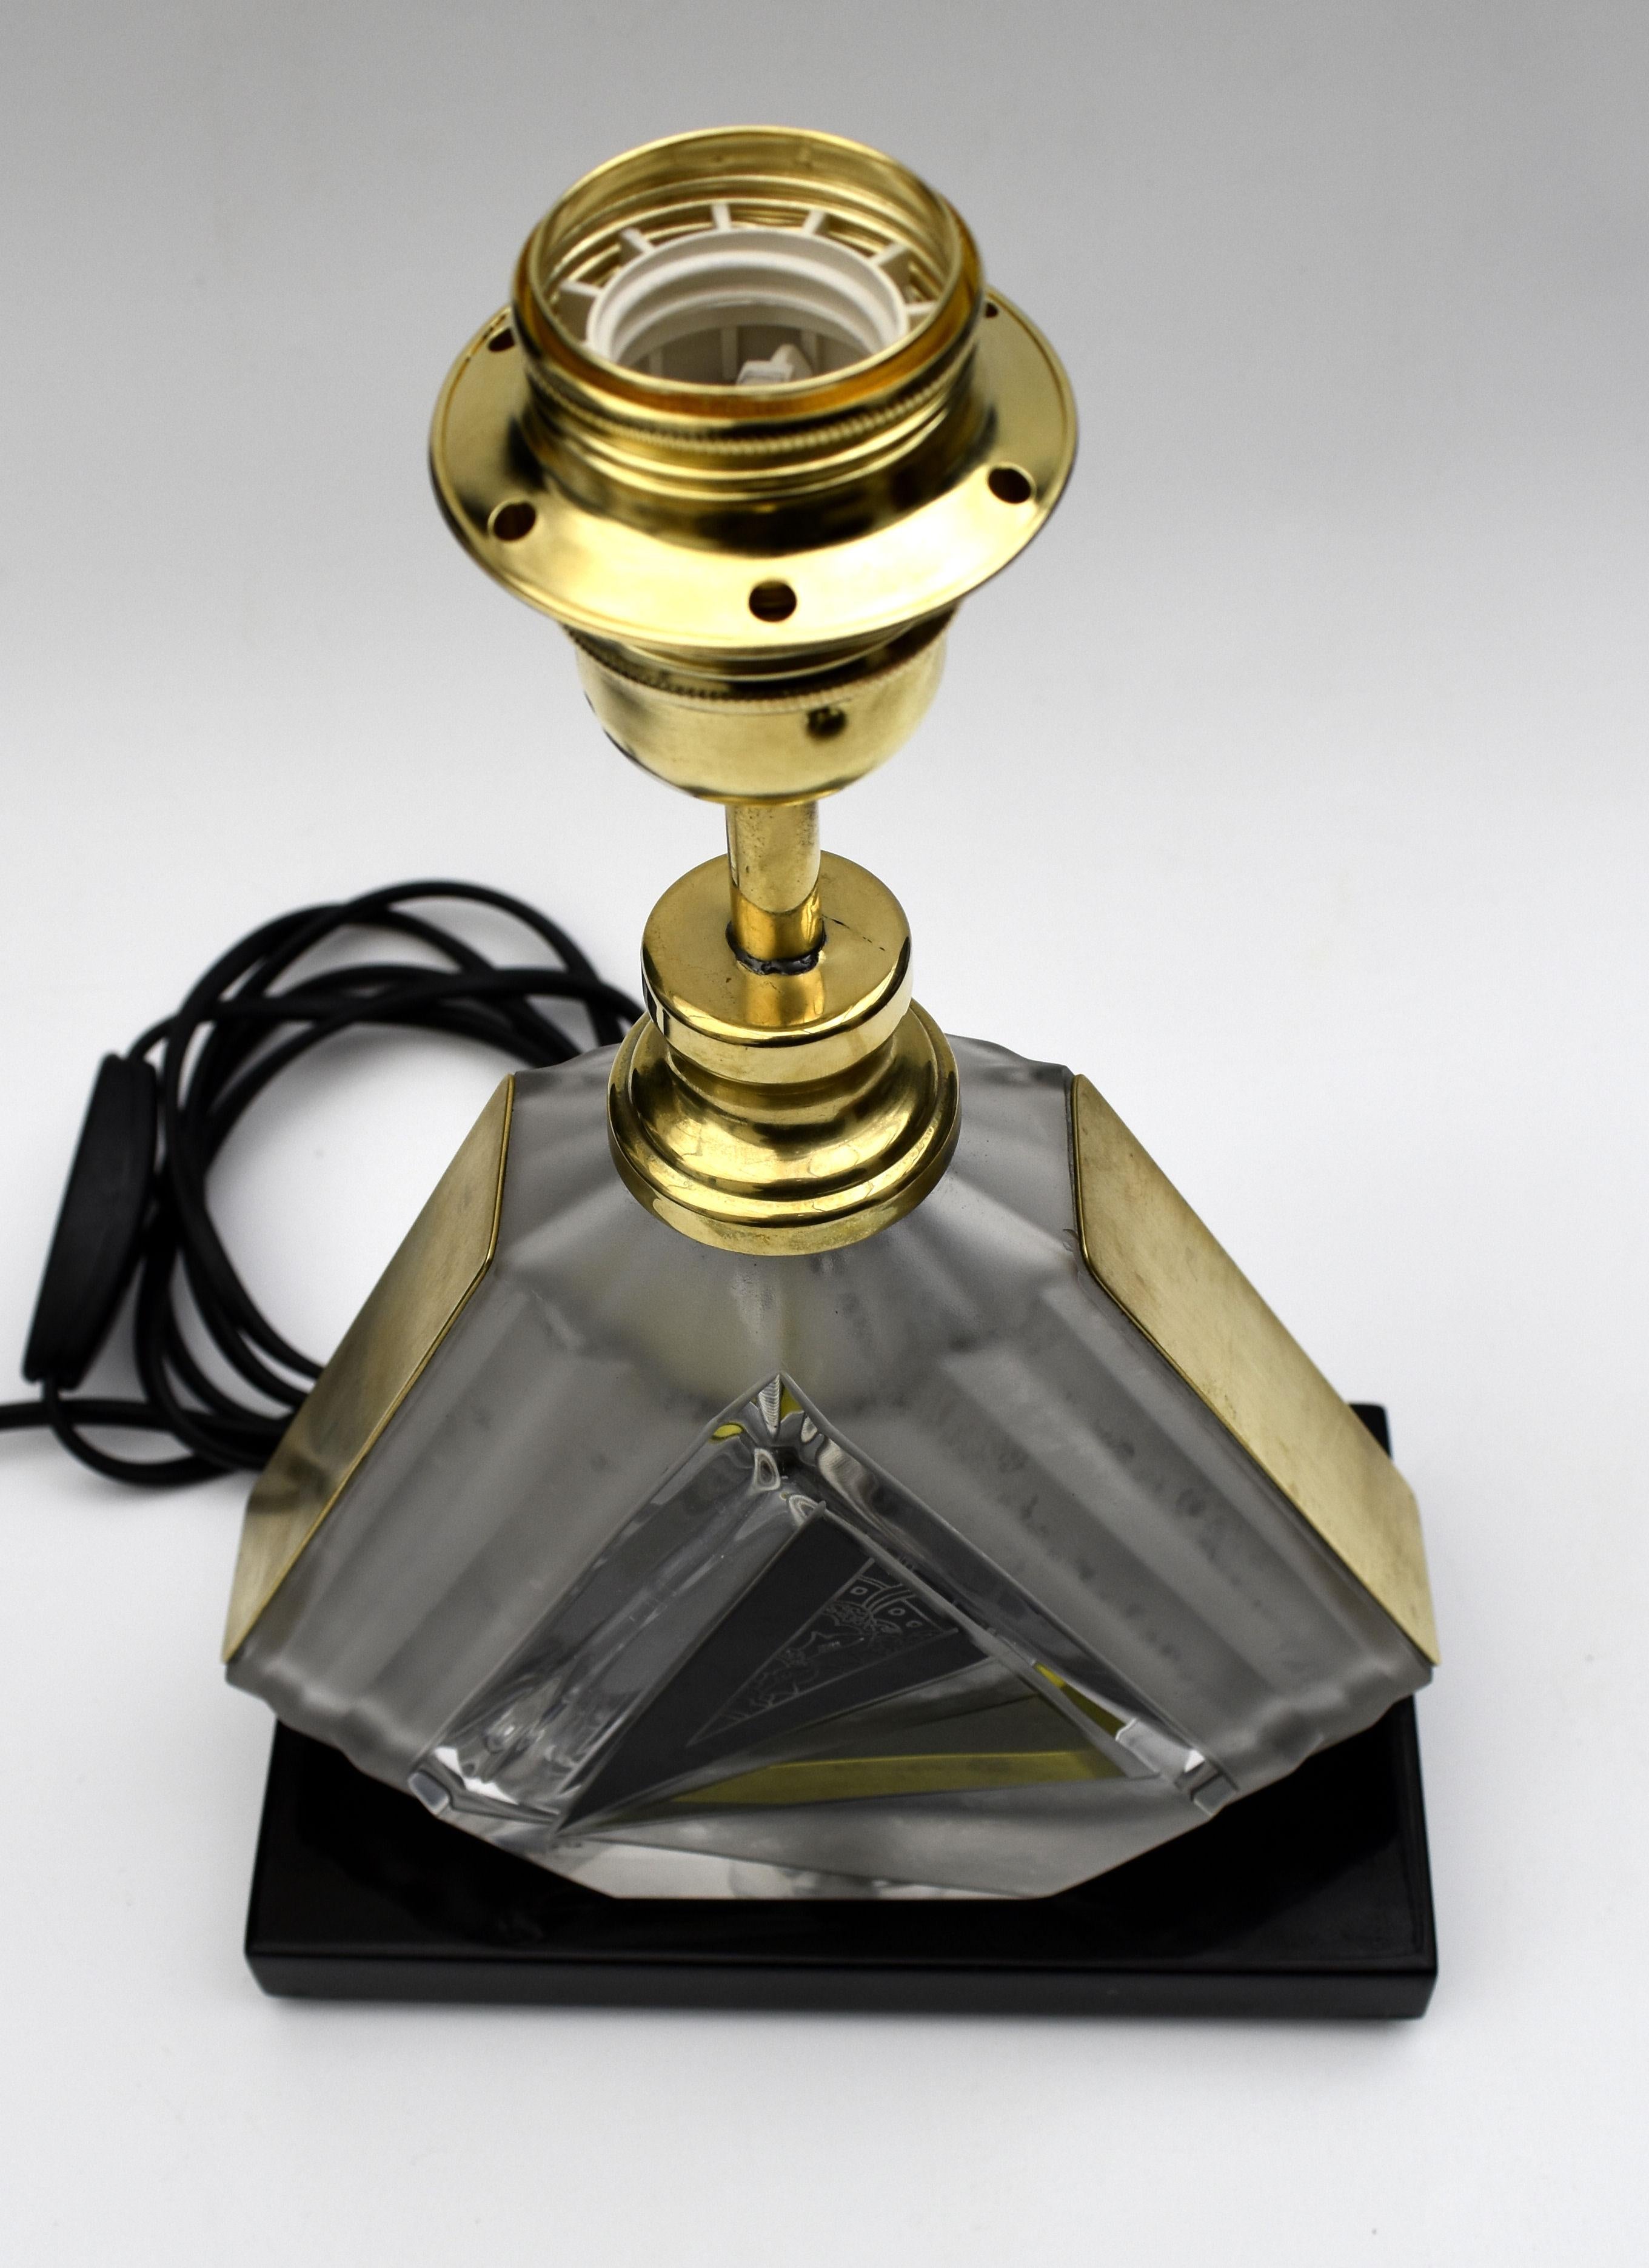 Czech Art Deco Iconic Glass Table Lamp By Karl Palda, c1930 For Sale